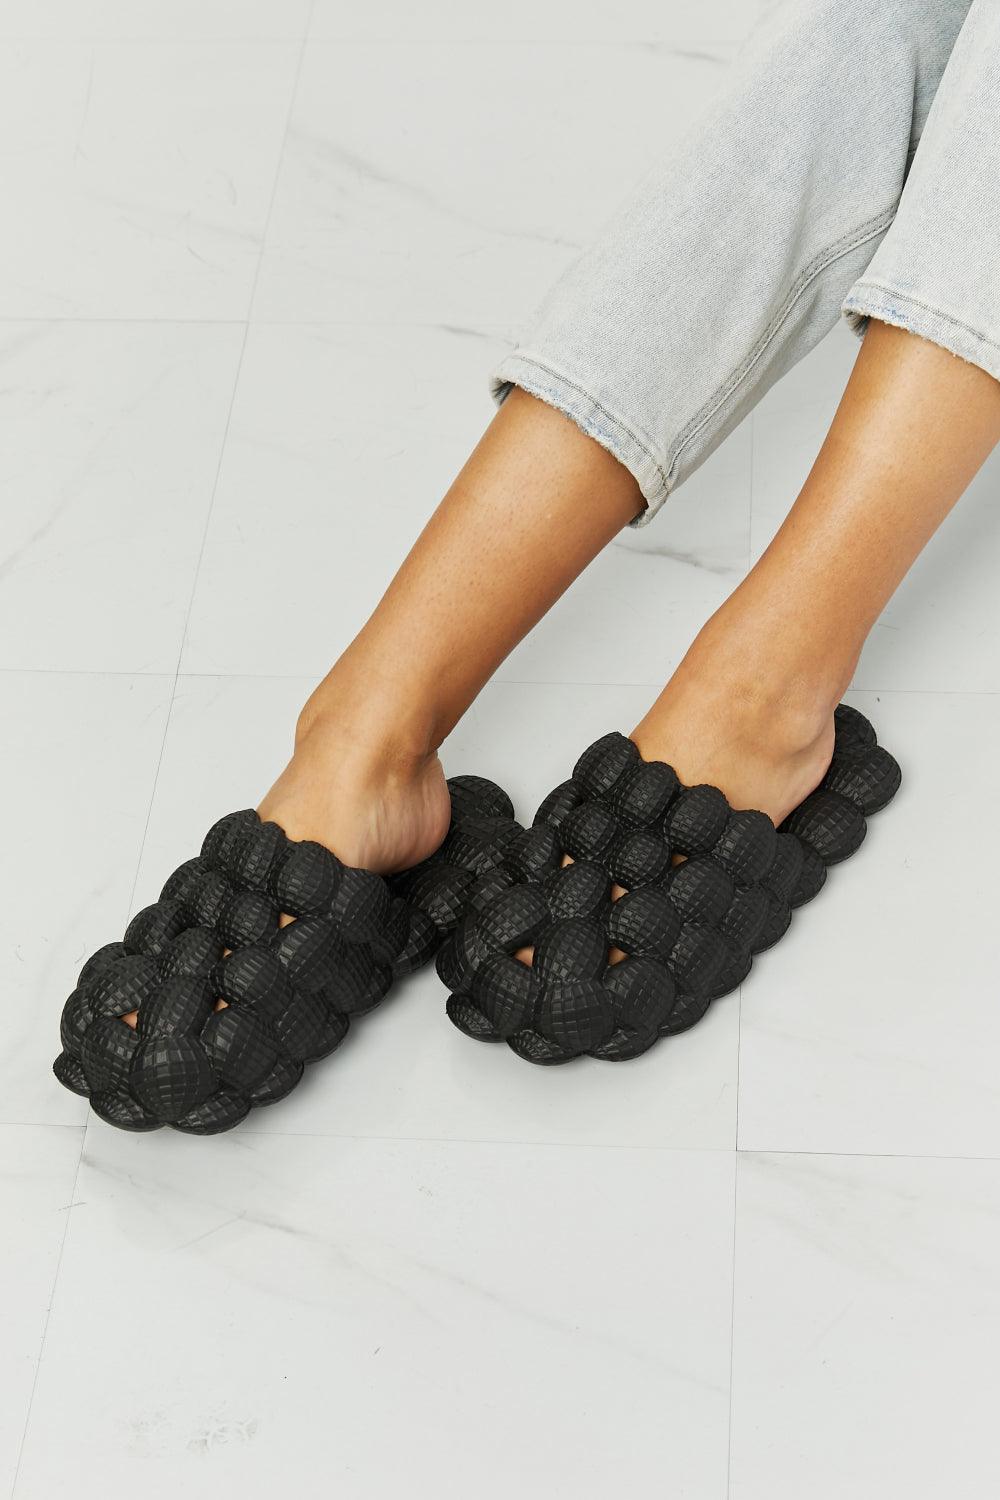 NOOK JOI Laid Back Bubble Slides in Black - The Fiery Jasmine